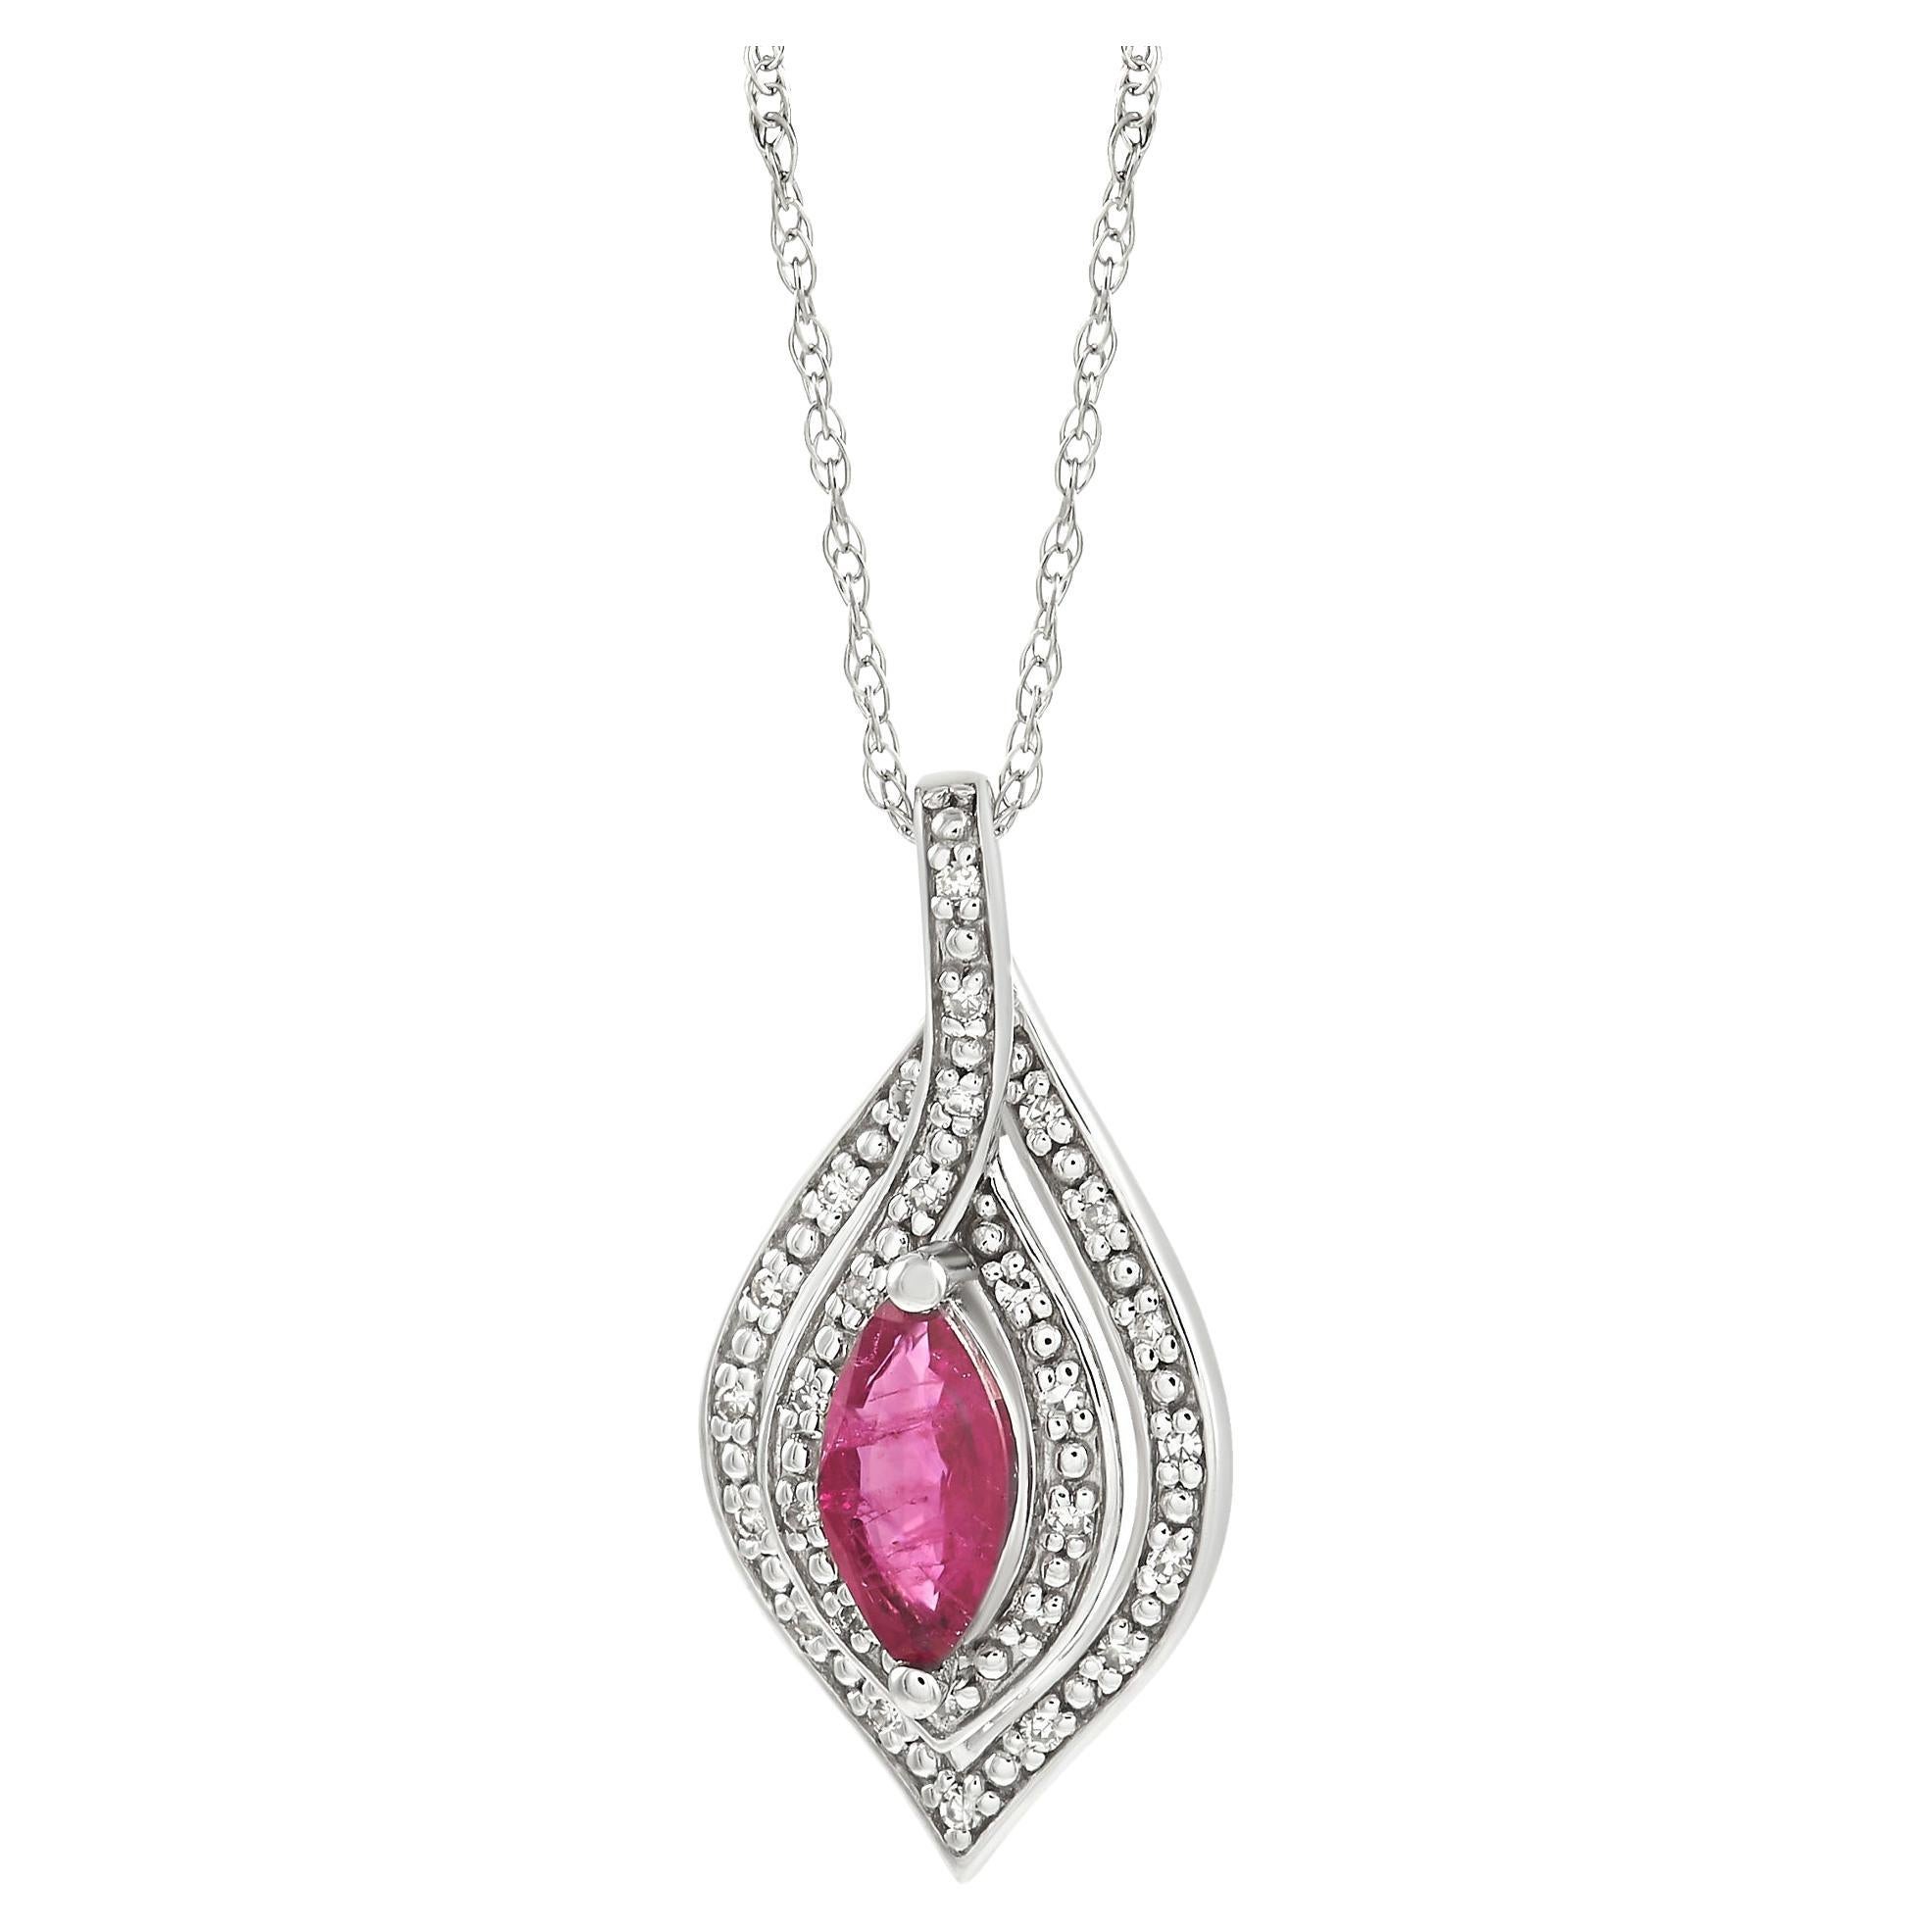 LB Exclusive 14K White Gold 0.08 Ct Diamond and Ruby Necklace For Sale